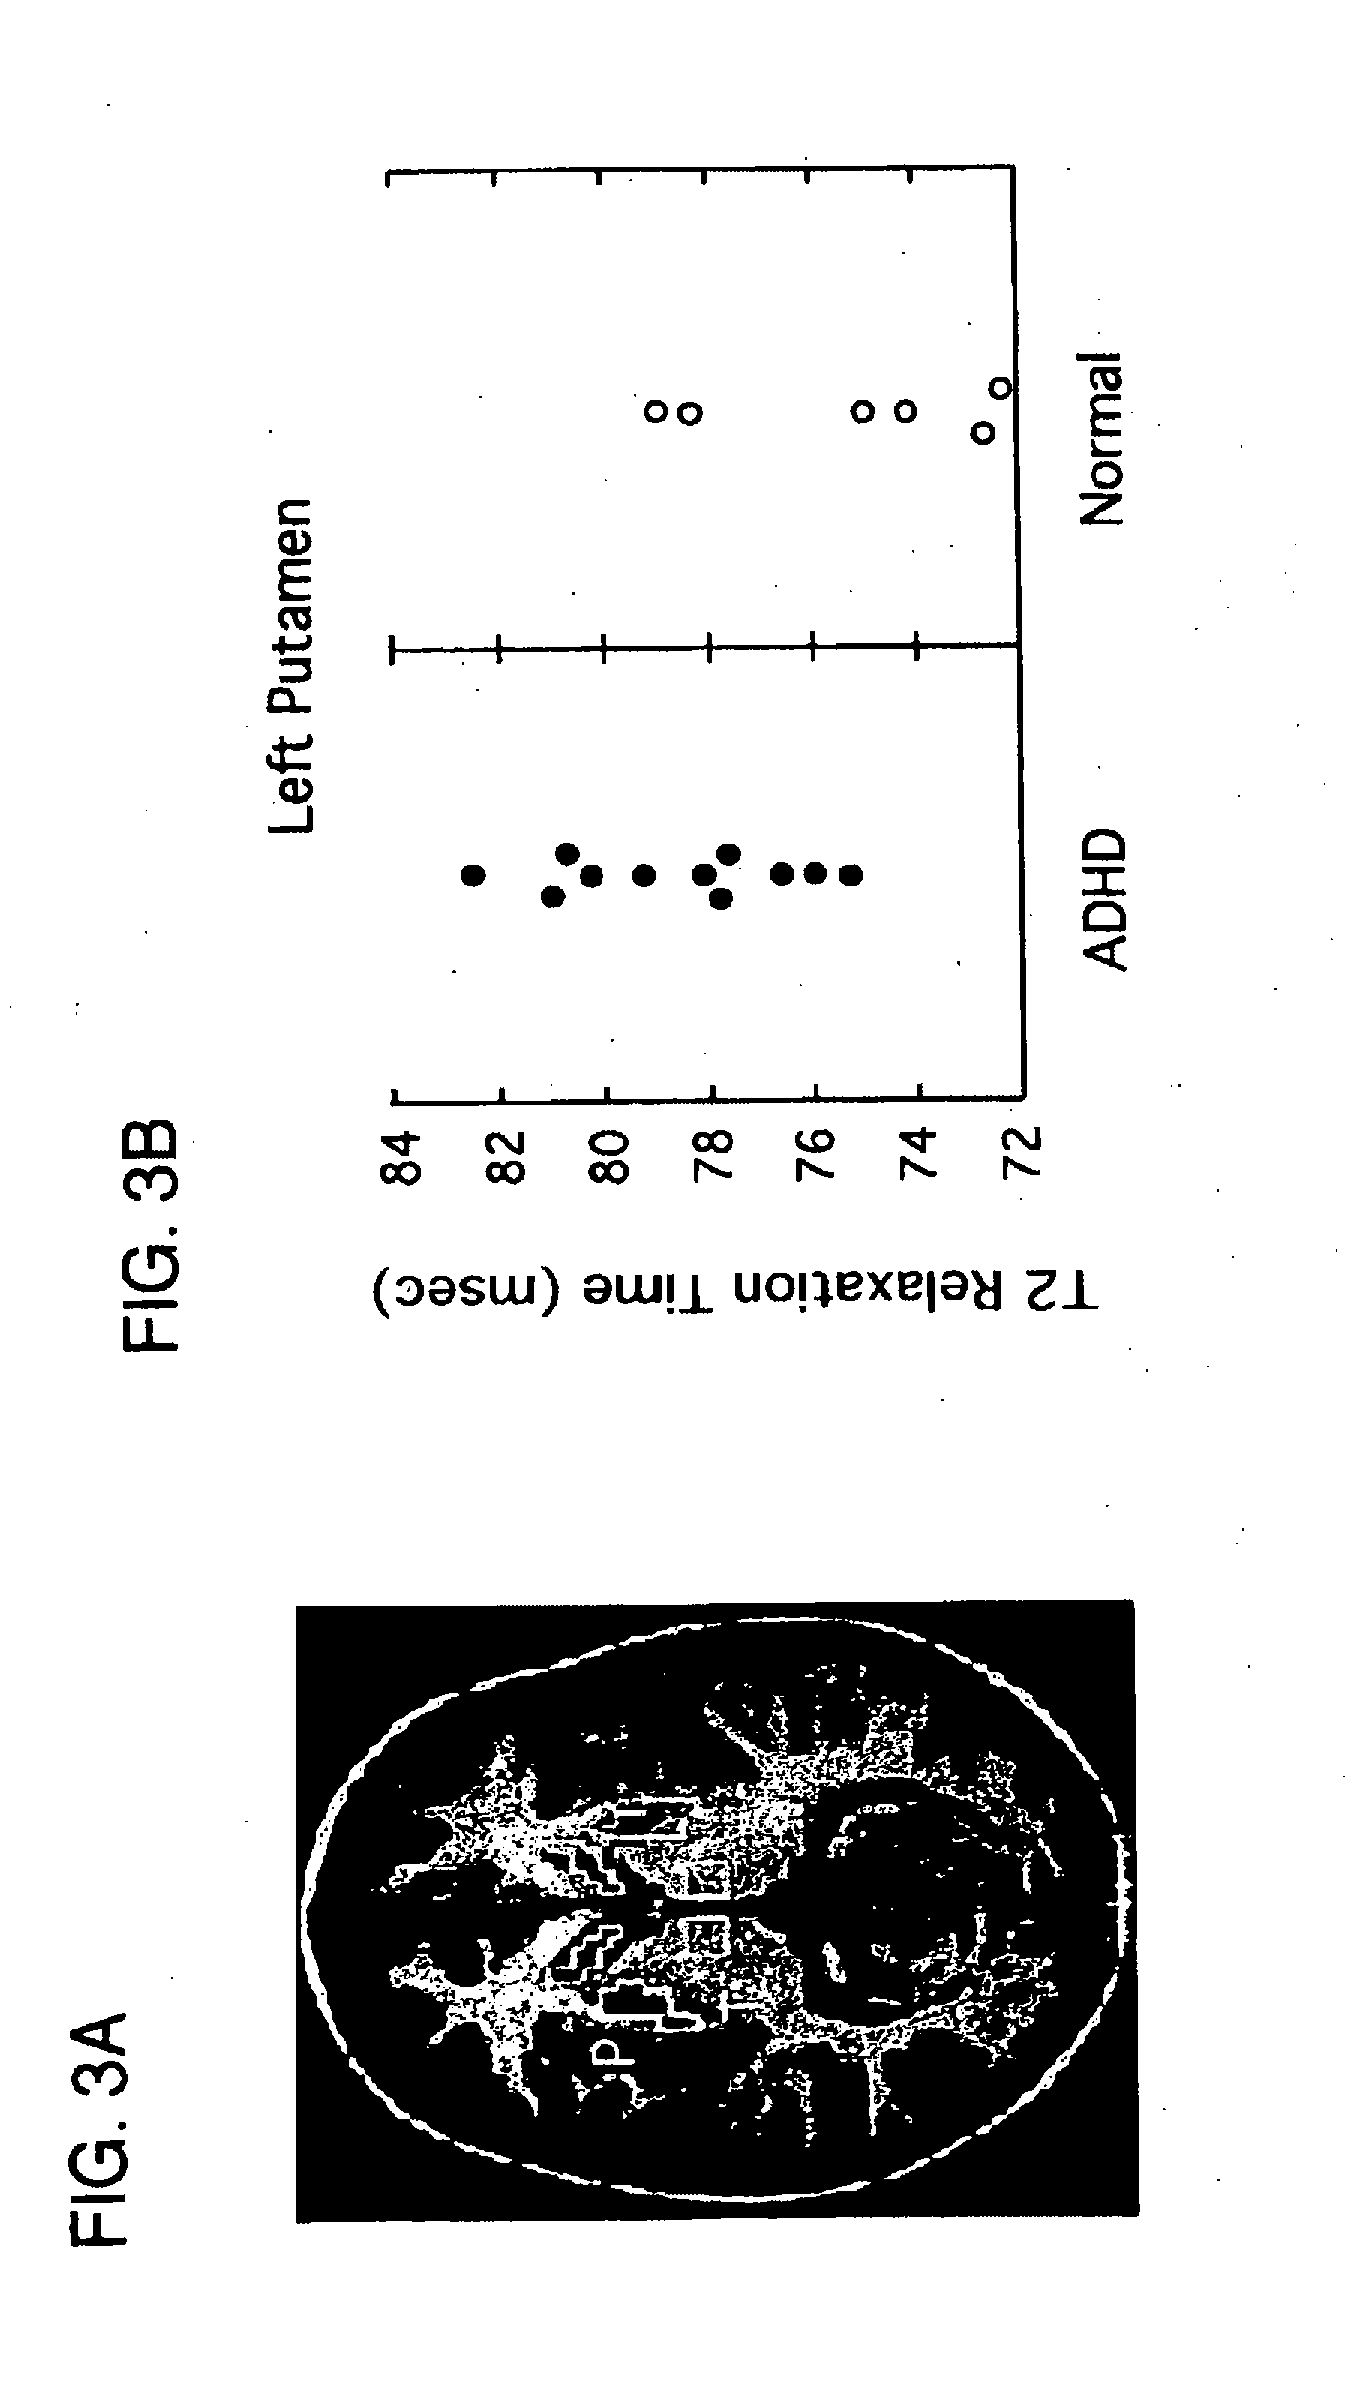 Methods of treating psychiatric, substance abuse, and other disorders using combinations containing omega-3 fatty acids